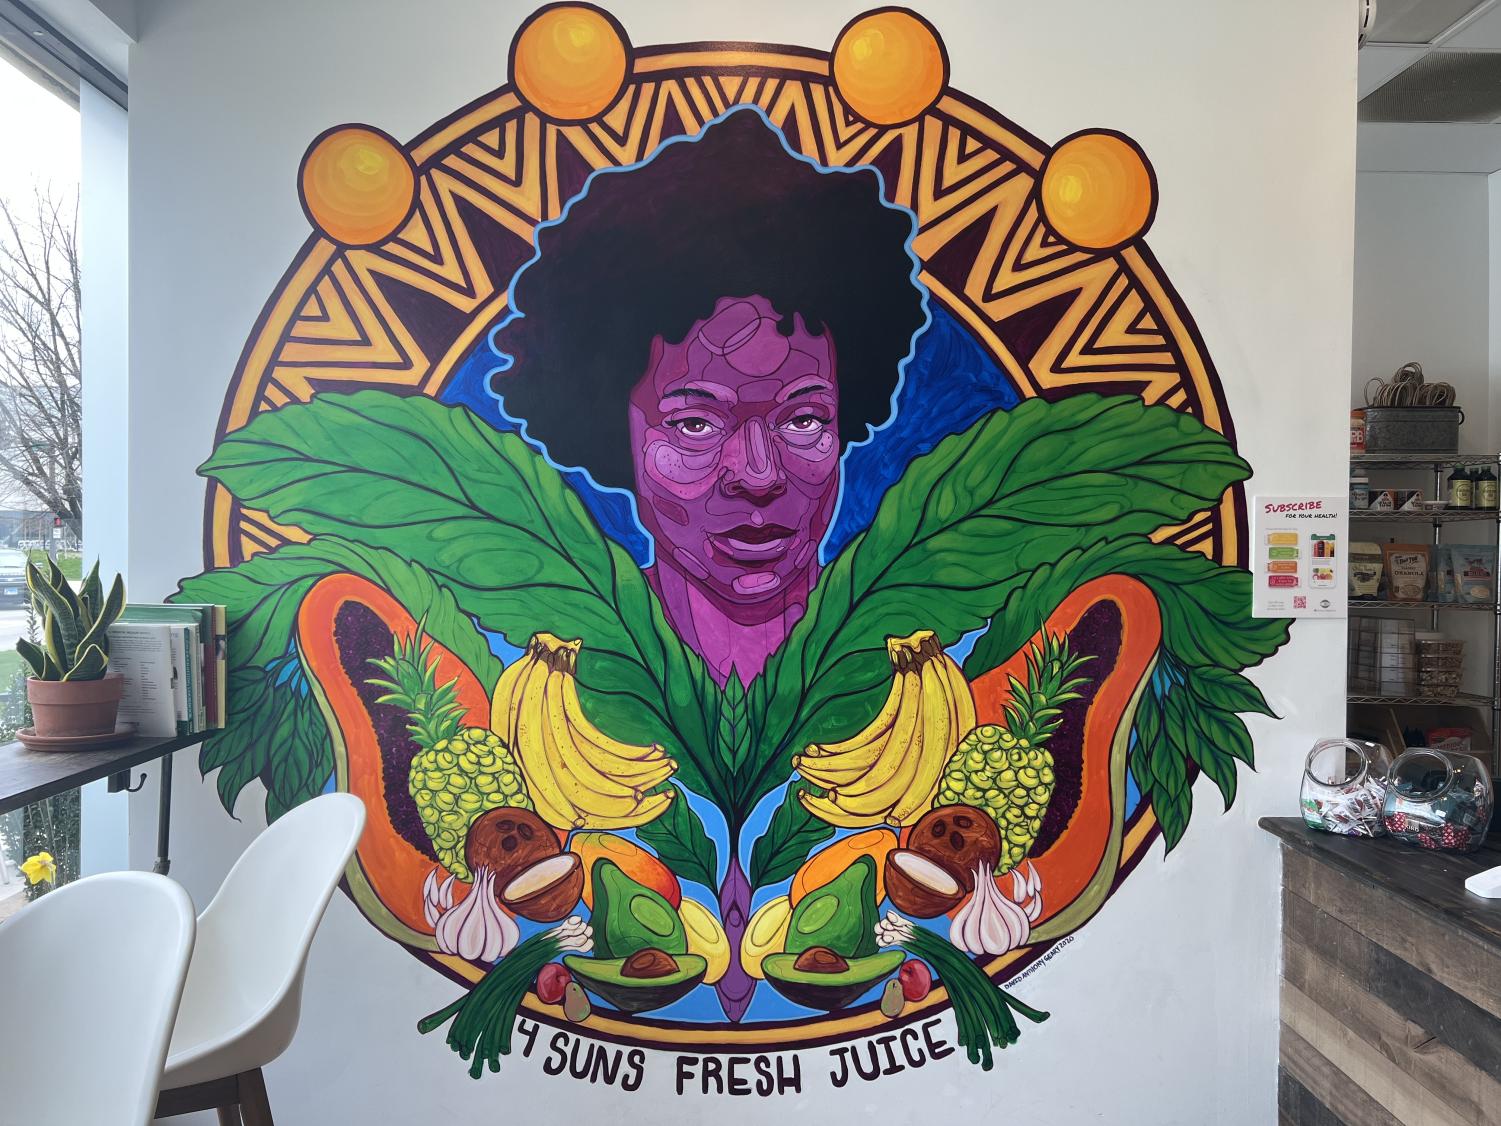 A+mural+of+a+Black+woman+surrounded+by+green+plants+and+various+colorful+fruits+on+a+white+wall.+She+is+surrounded+by+a+sun+design+and+the+words+%E2%80%9C4+Suns+Fresh+Juice%E2%80%9D+line+the+bottom+of+the+mural.